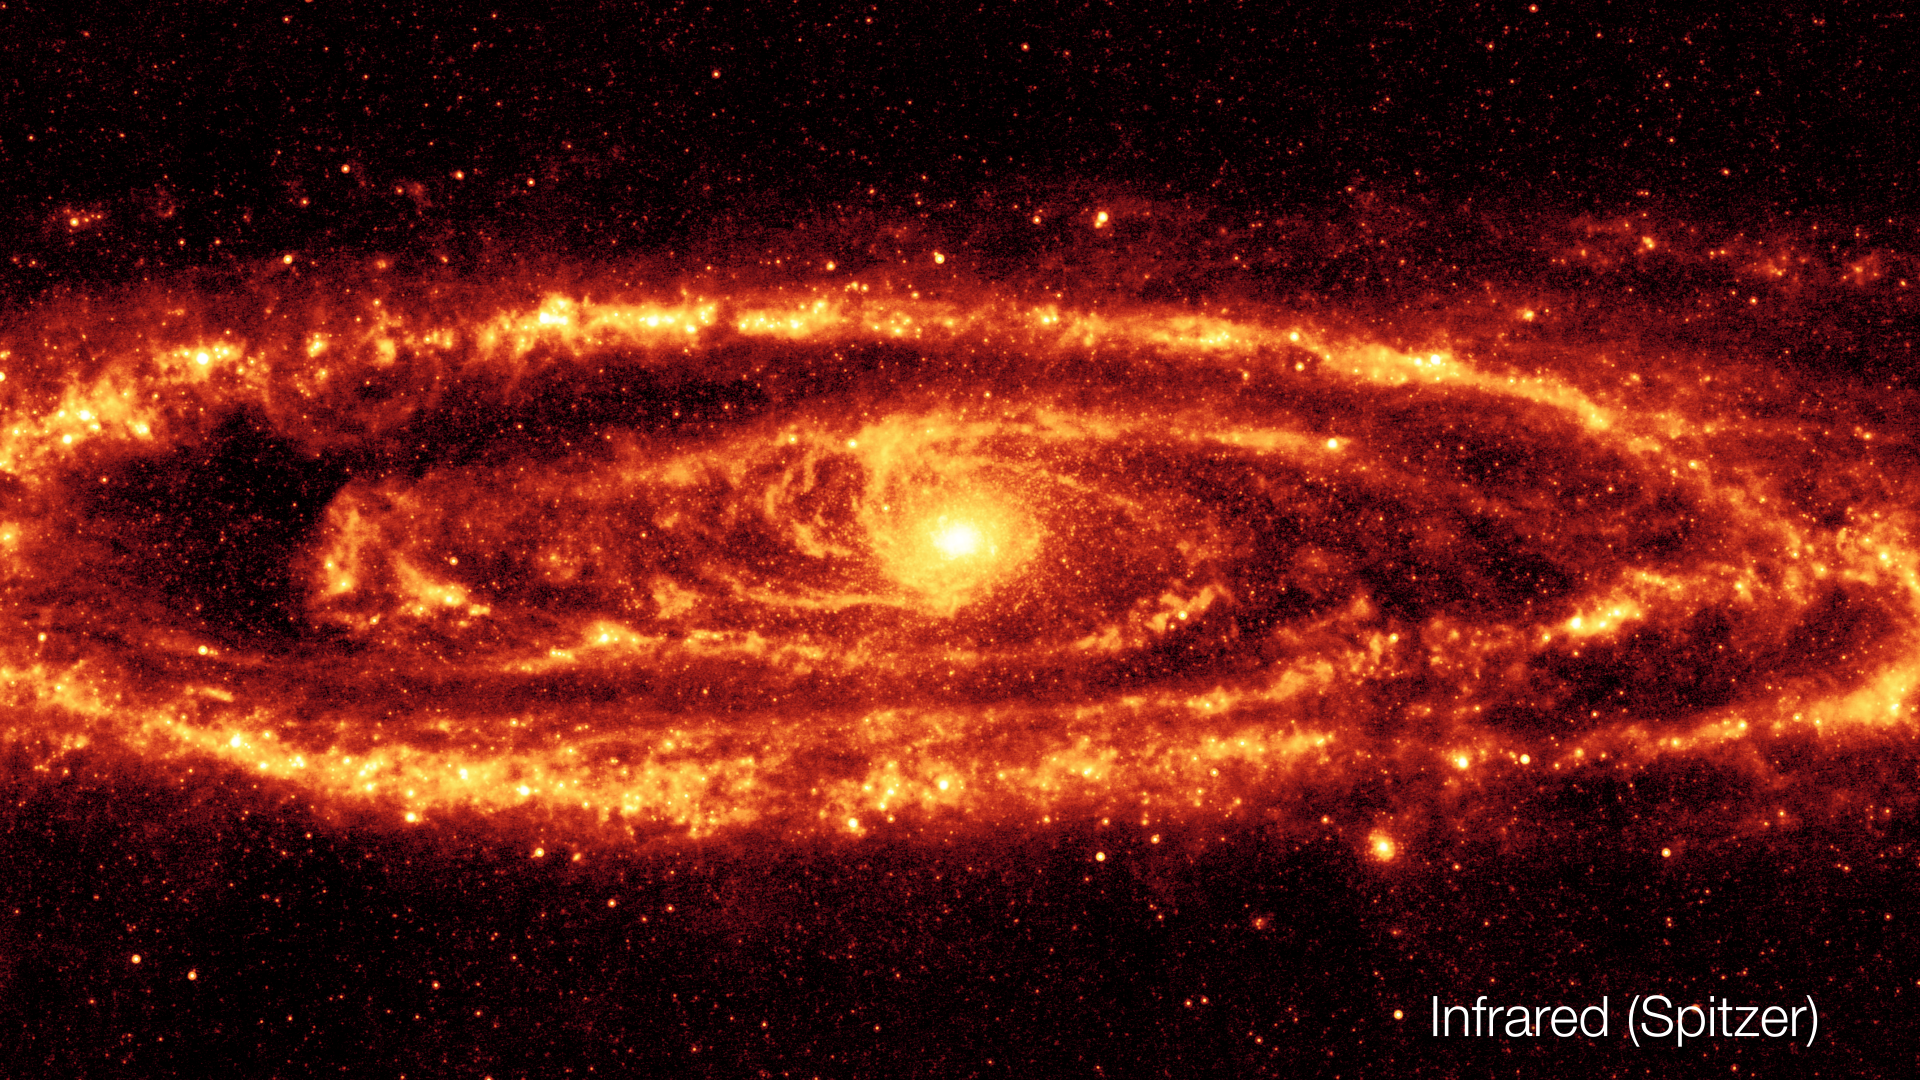 Preview Image for Andromeda Galaxy in Visible and Infrared